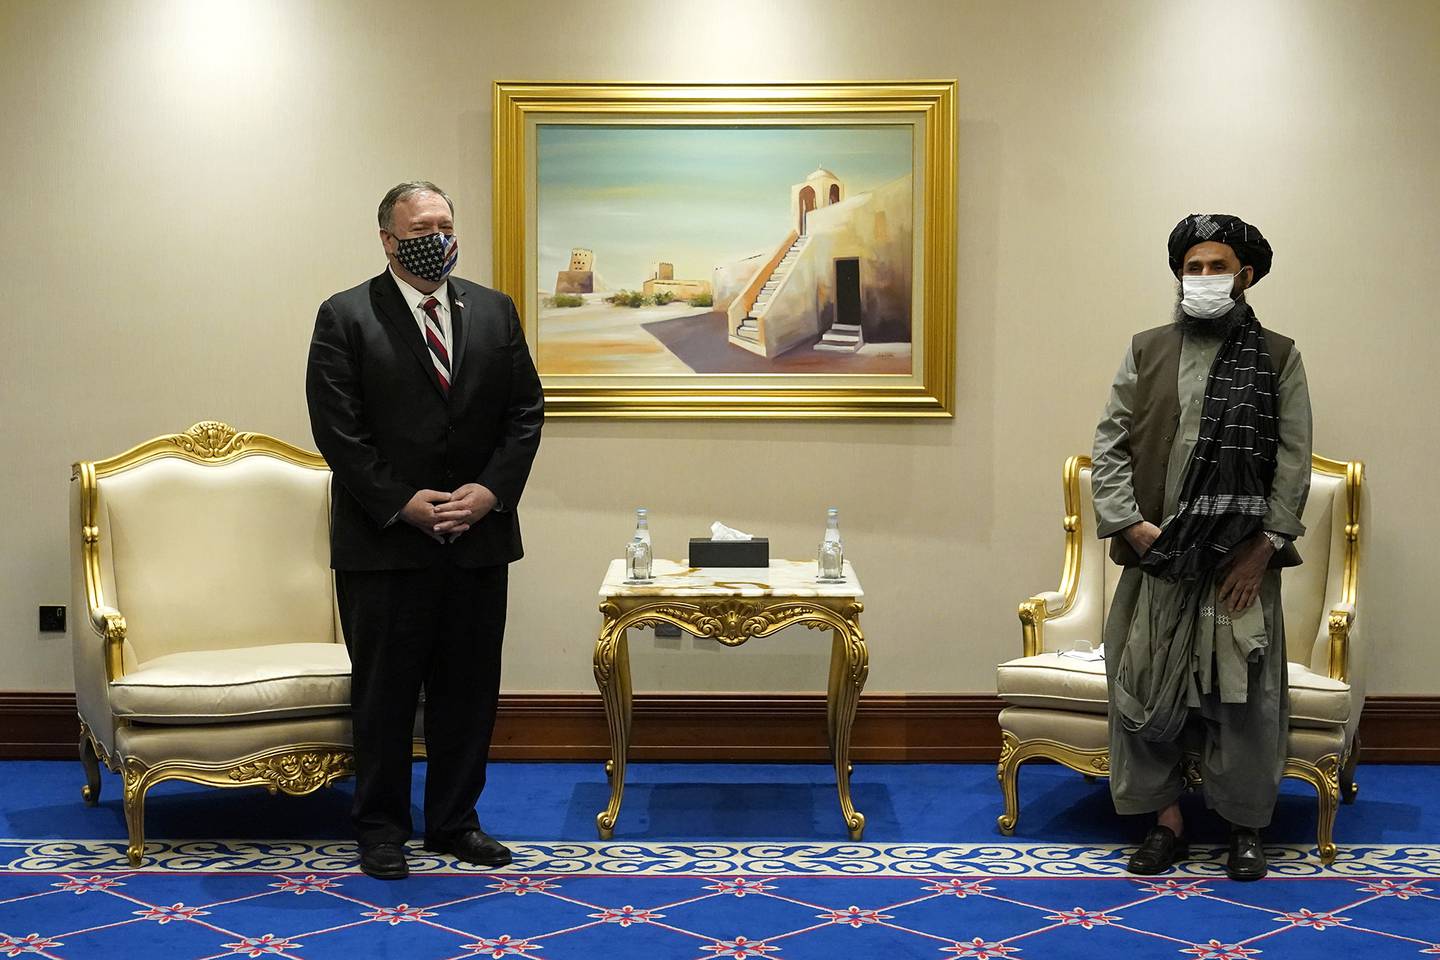 Secretary of State Mike Pompeo meets with Mullah Abdul Ghani Baradar, head of the Taliban's peace negotiation team, amid talks between the Taliban and the Afghan government, Saturday, Nov. 21, 2020, in Doha, Qatar.